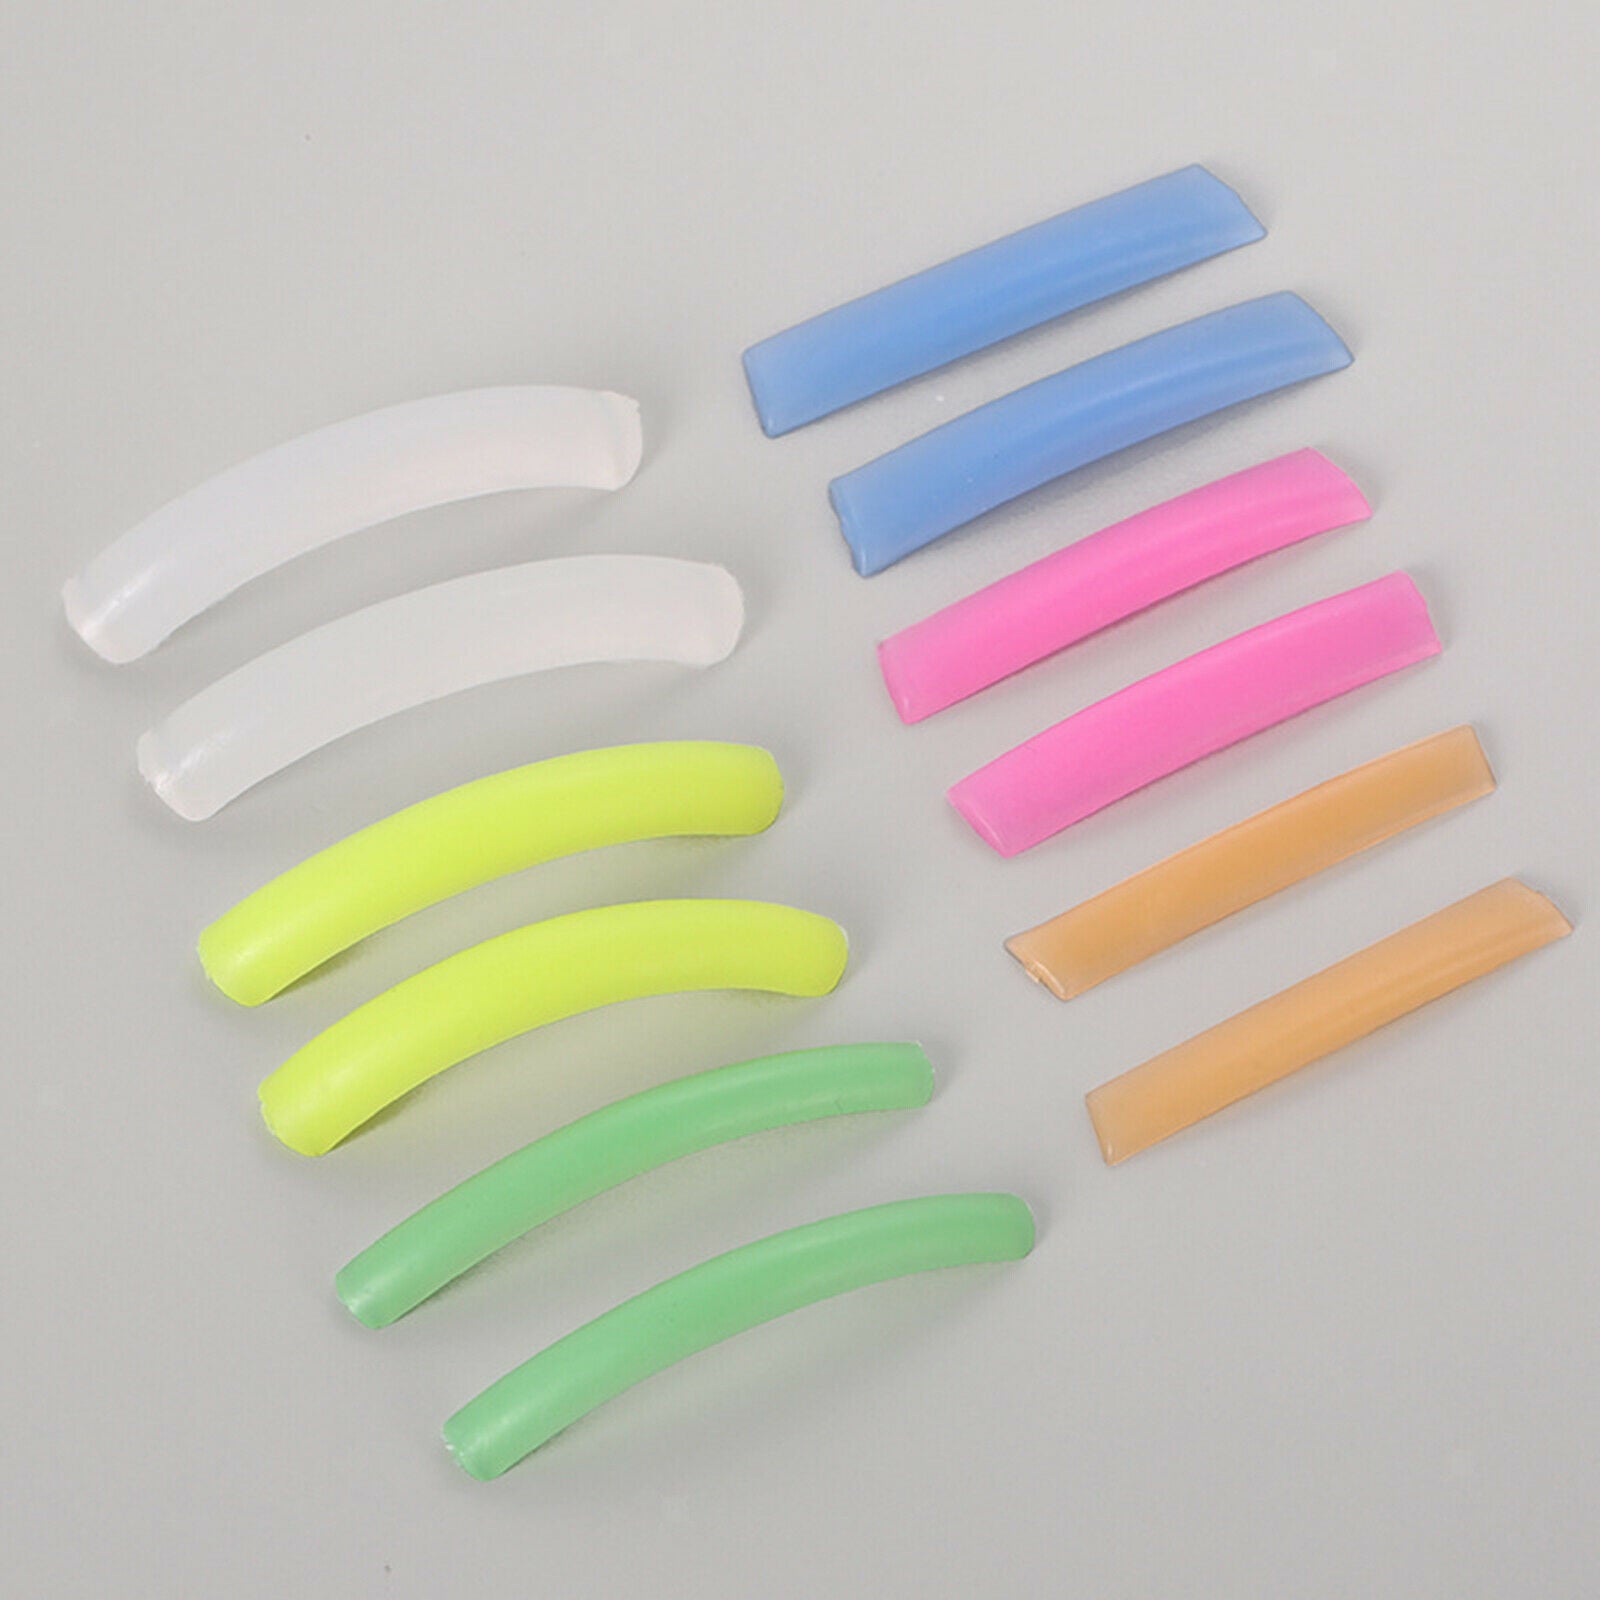 6 Pair Lash Perming Pads Colorful Reusable Curler Rods for Beauty Tool